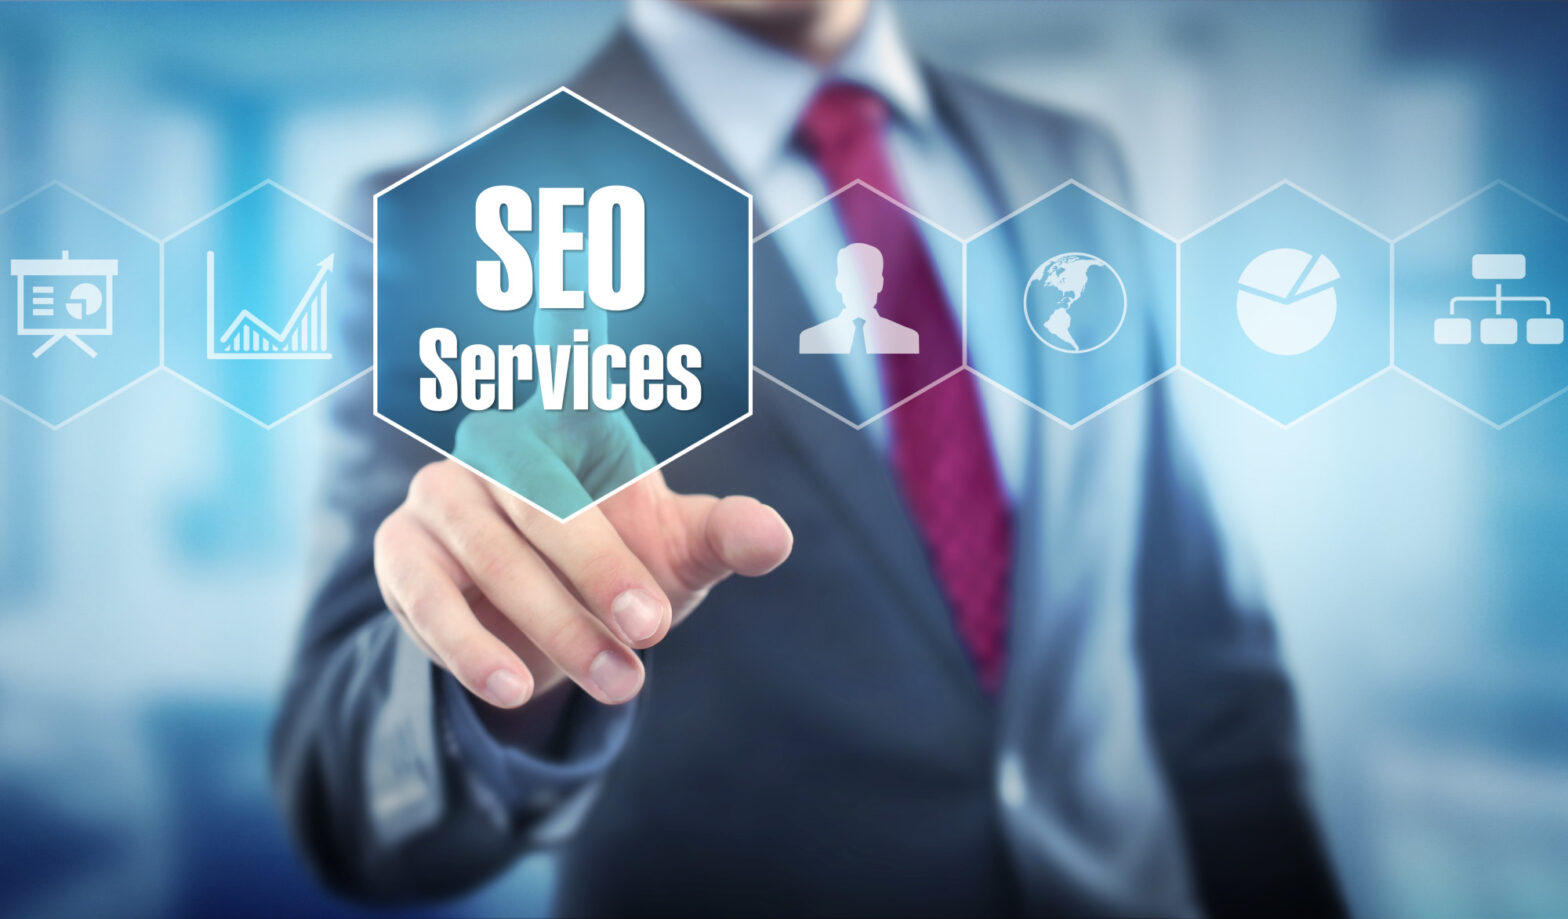 Don’t know if you should hire an SEO constant or an SEO agency? Read this